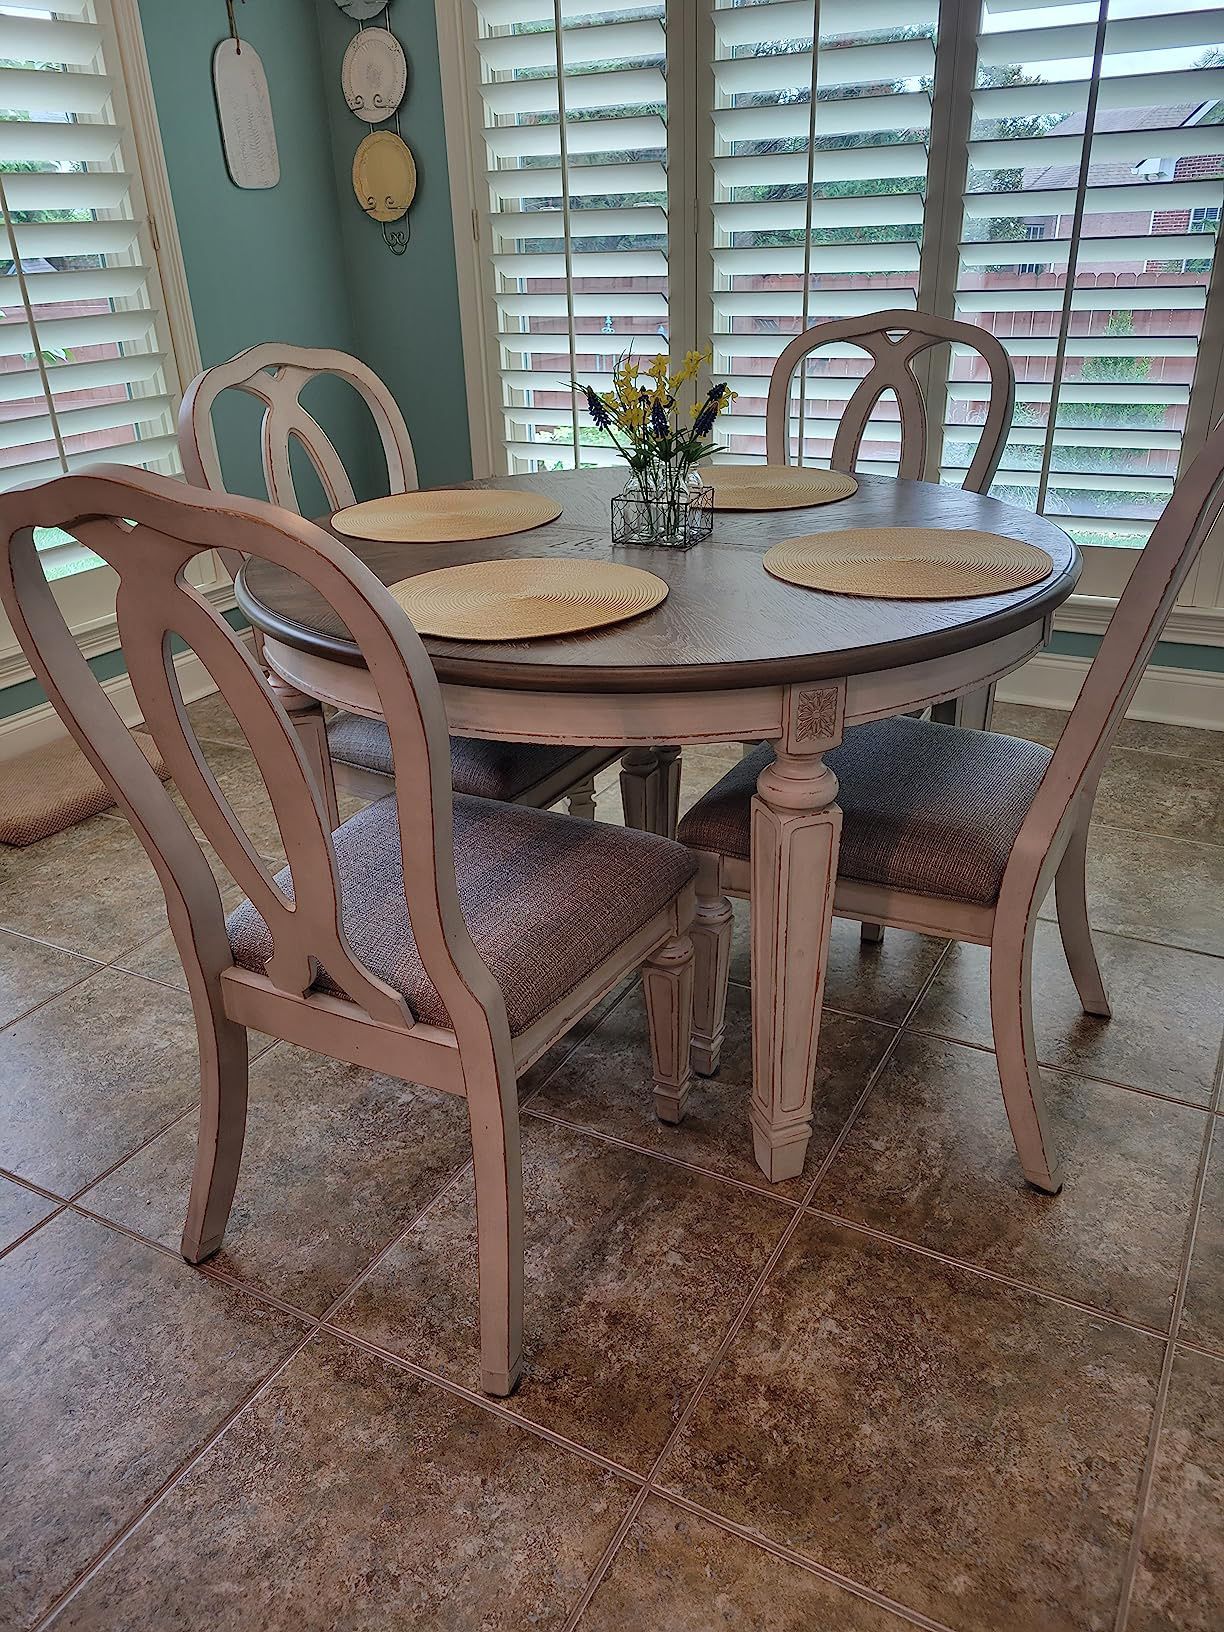 Oval Dining Room Extension Table